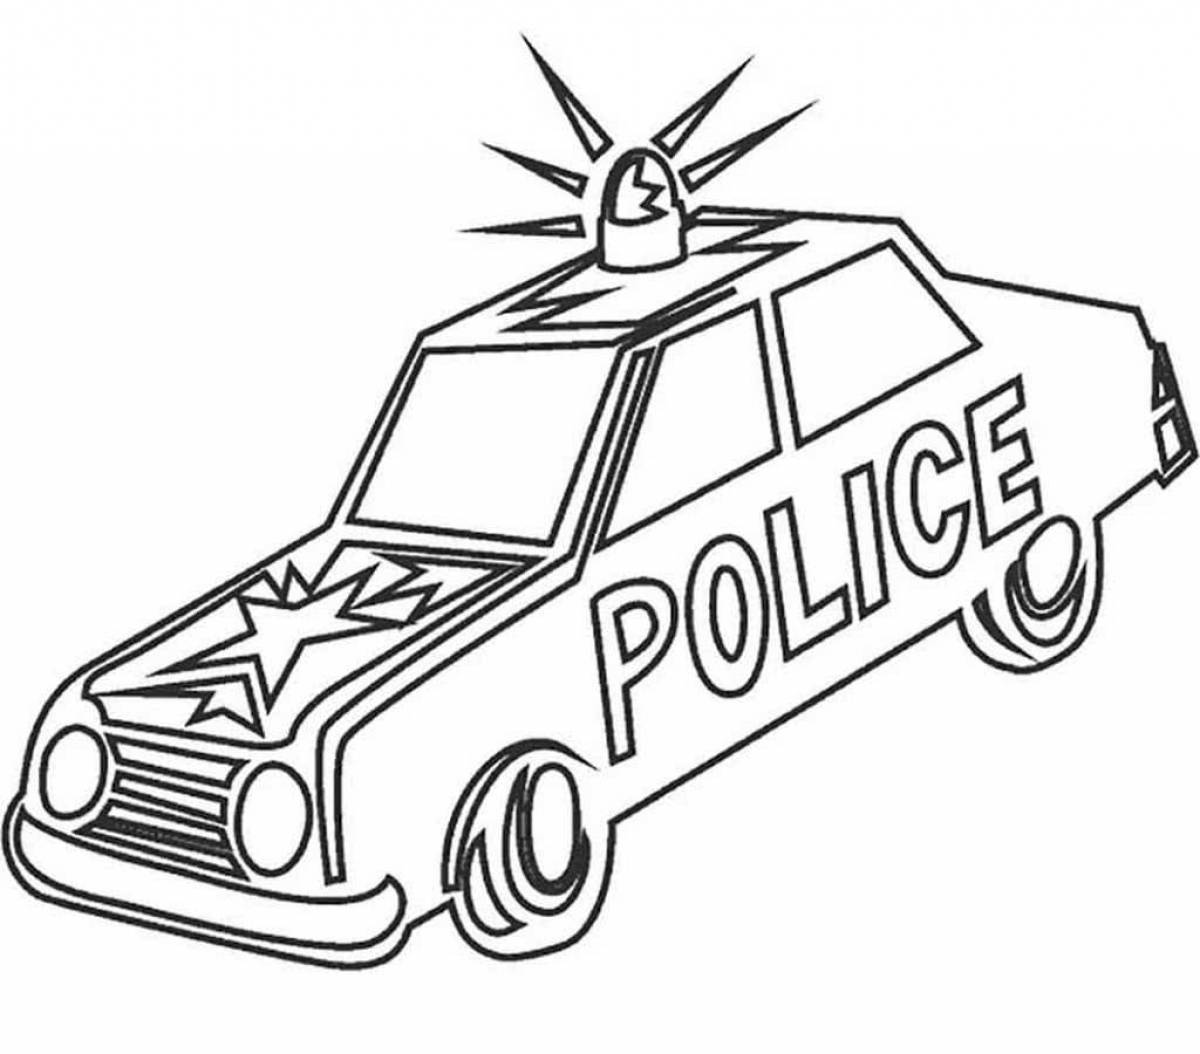 Coloring page brave policeman